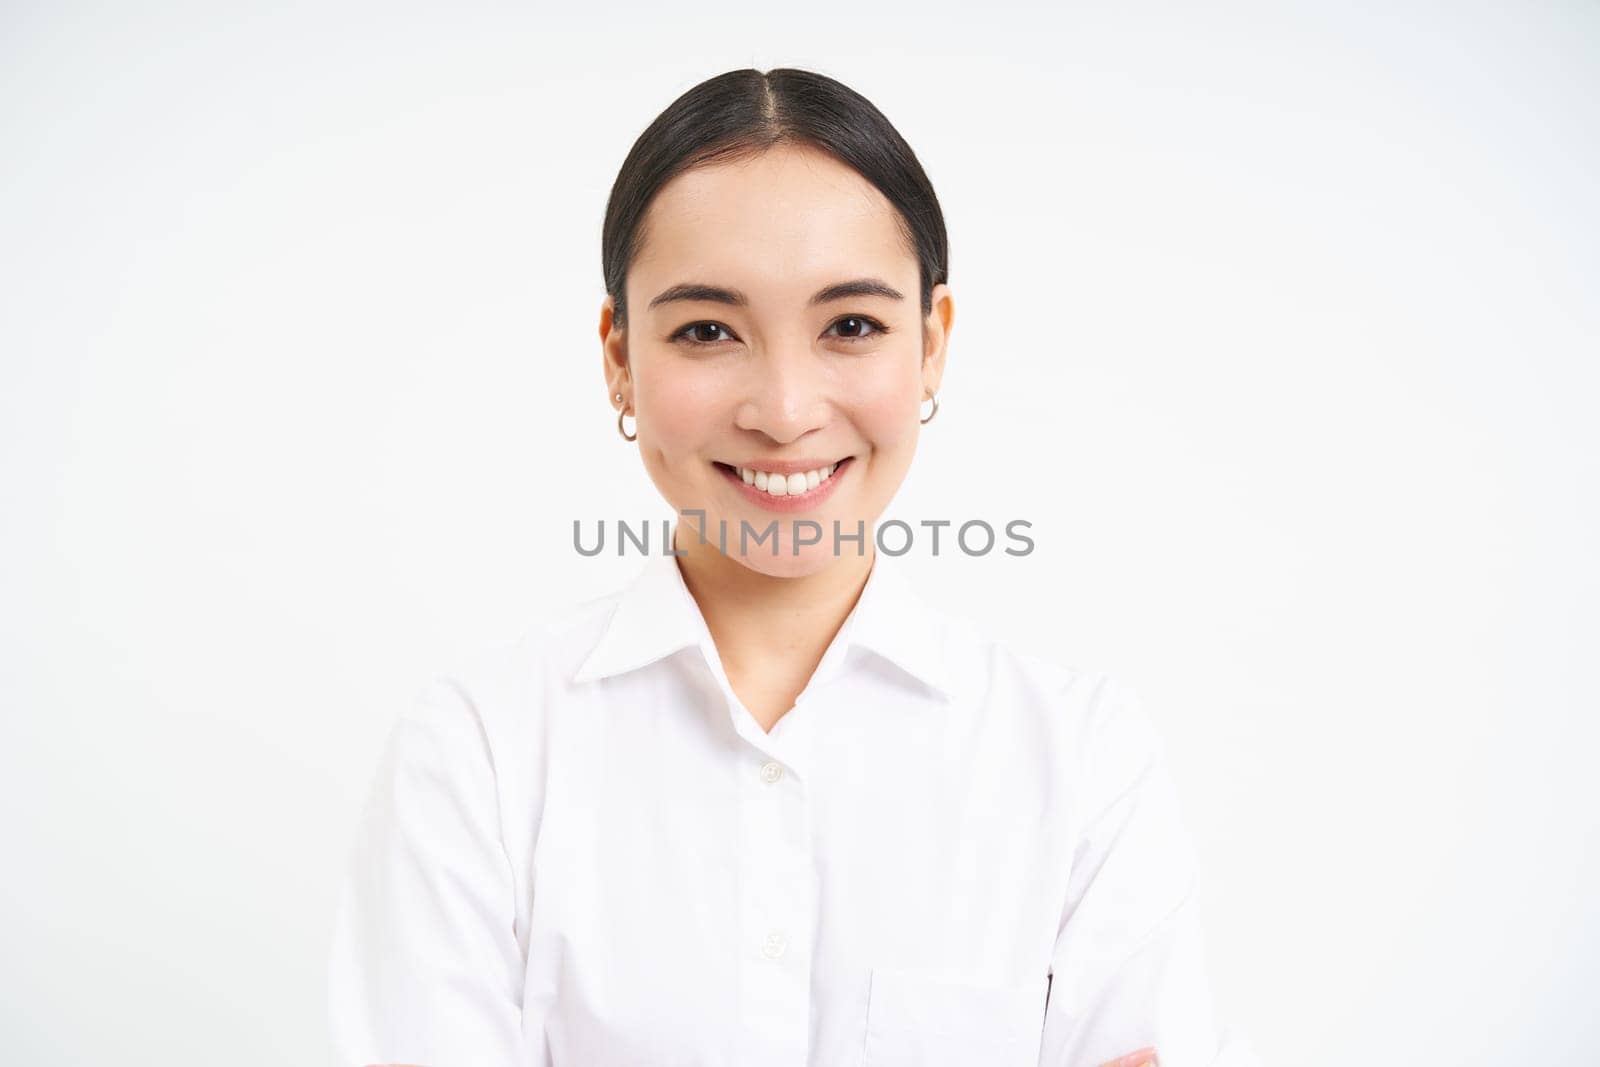 Portrait of young asian woman professional, smiling with confidence, professional look, standing over white background.